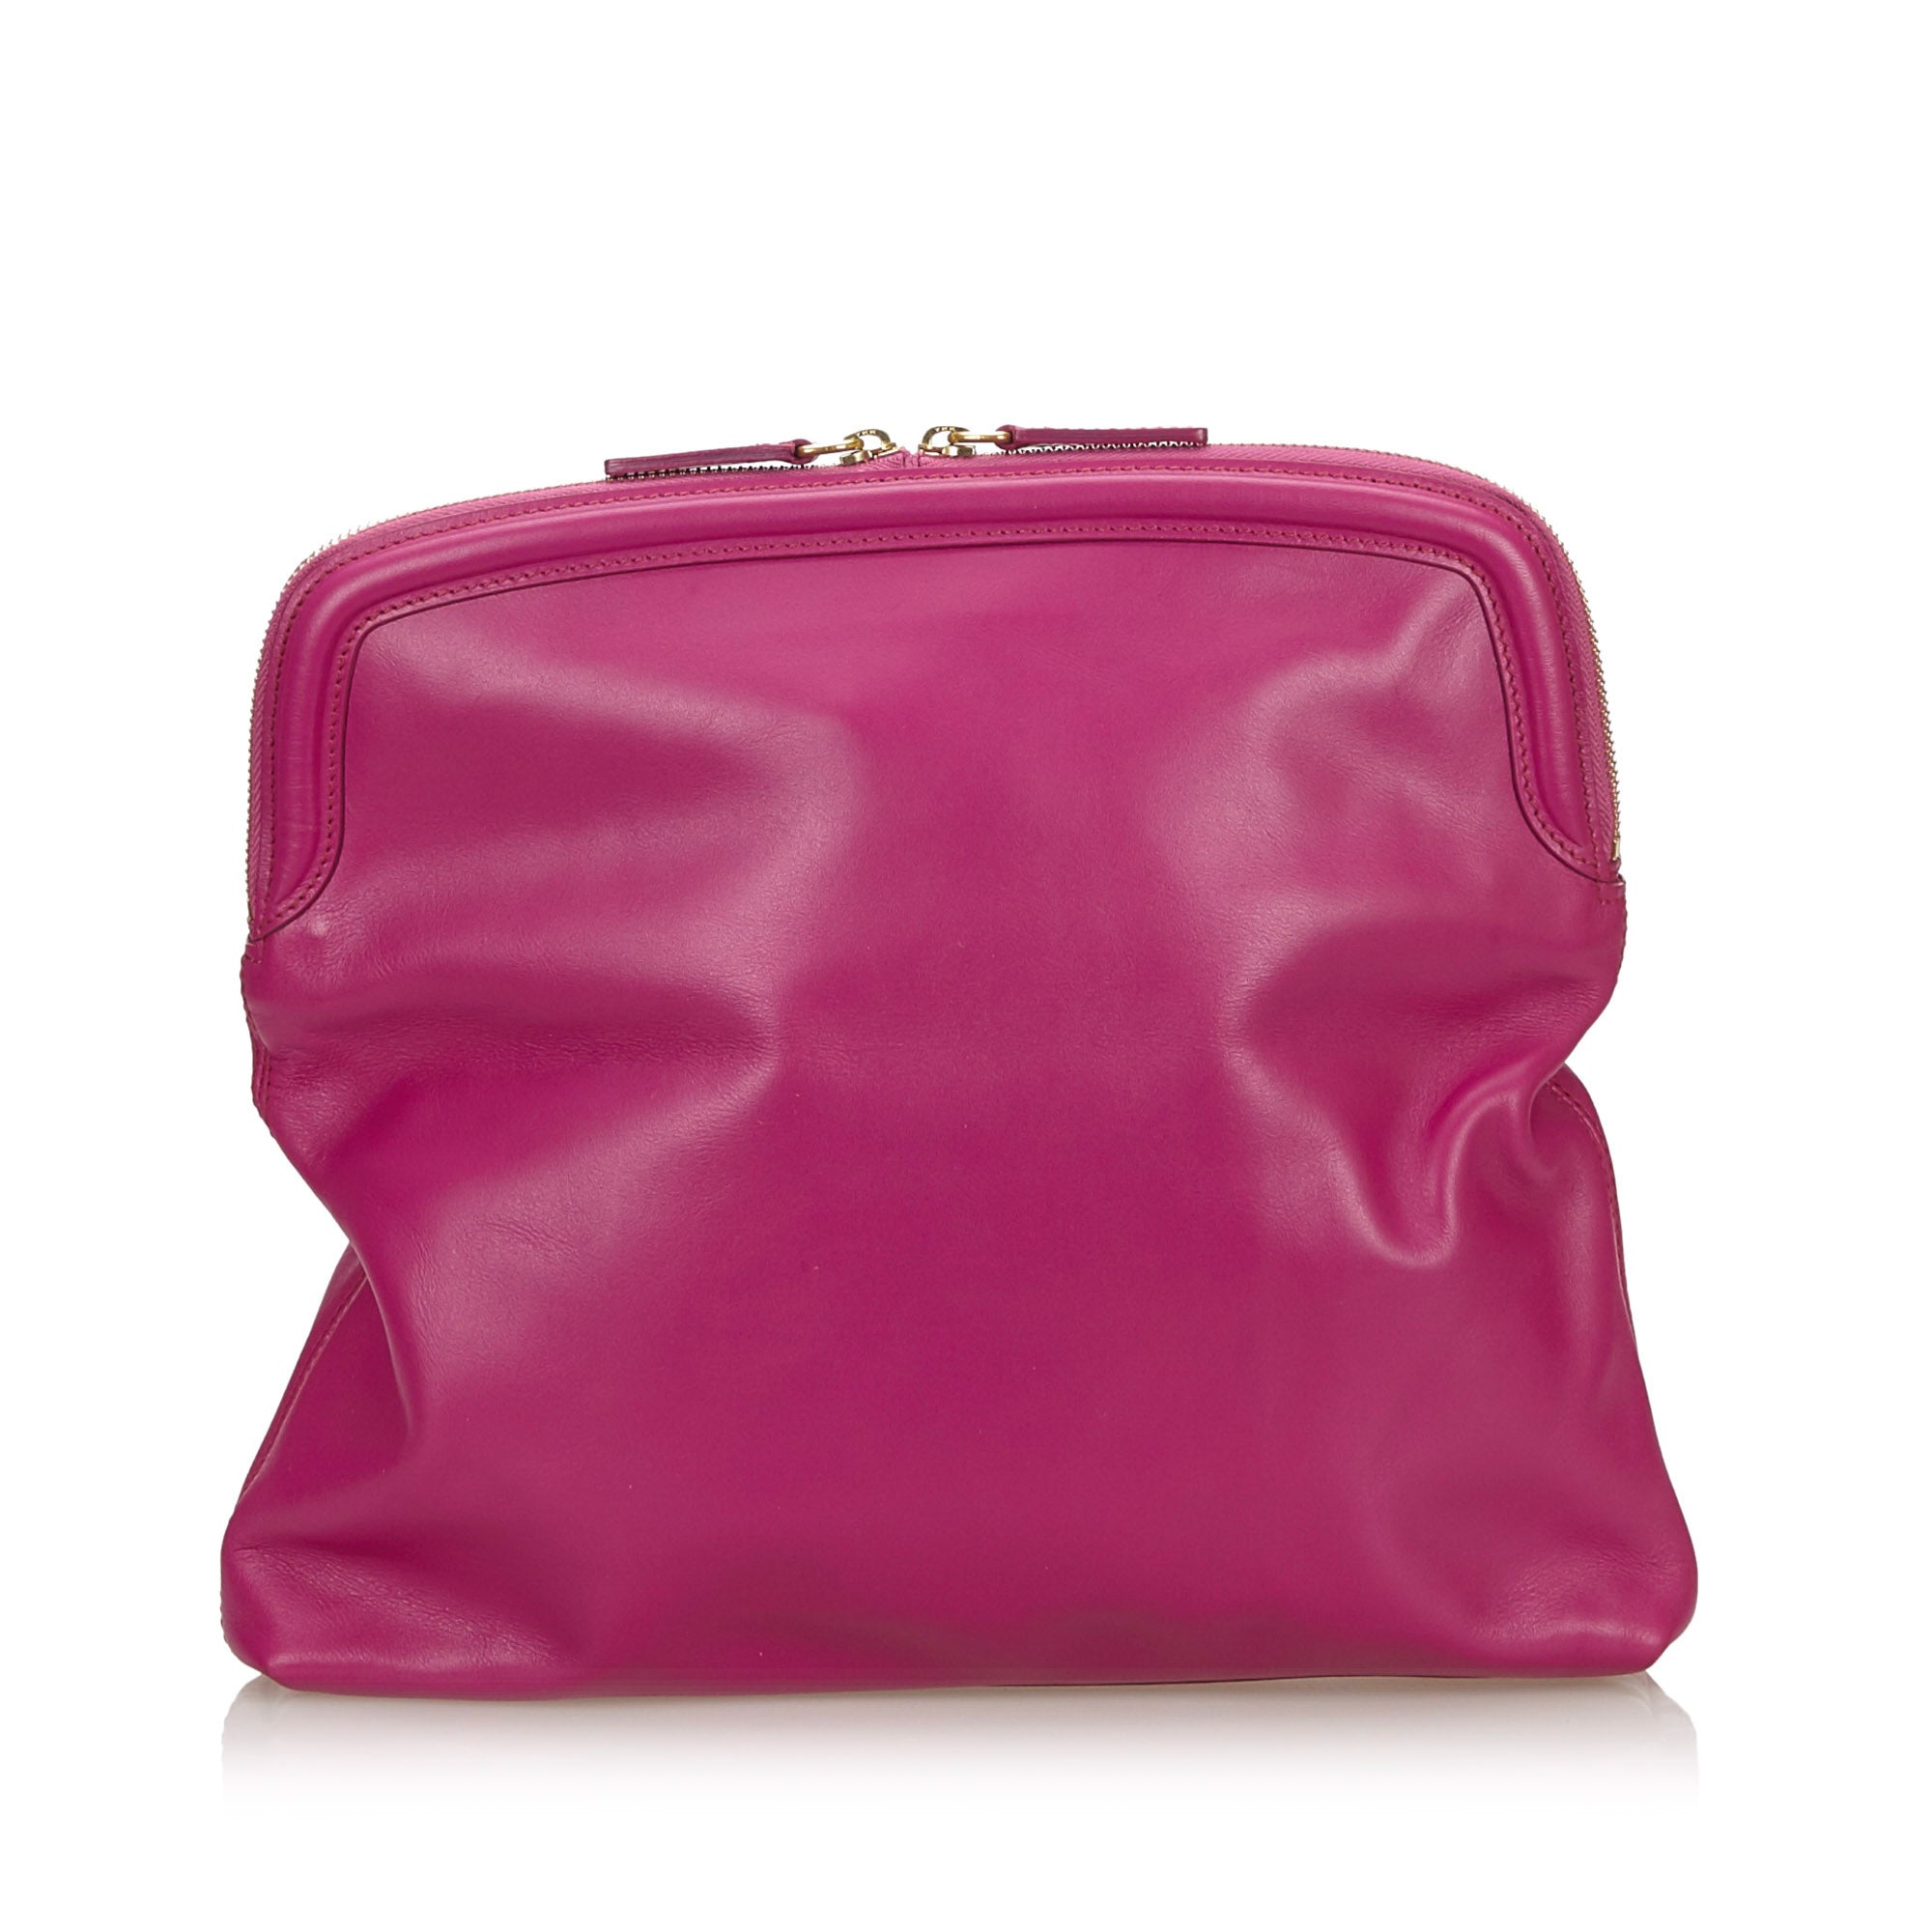 Buy & Consign Authentic Alexander Mcqueen Skull Padlock Fold-Over Clutch Bag at The Plush Posh